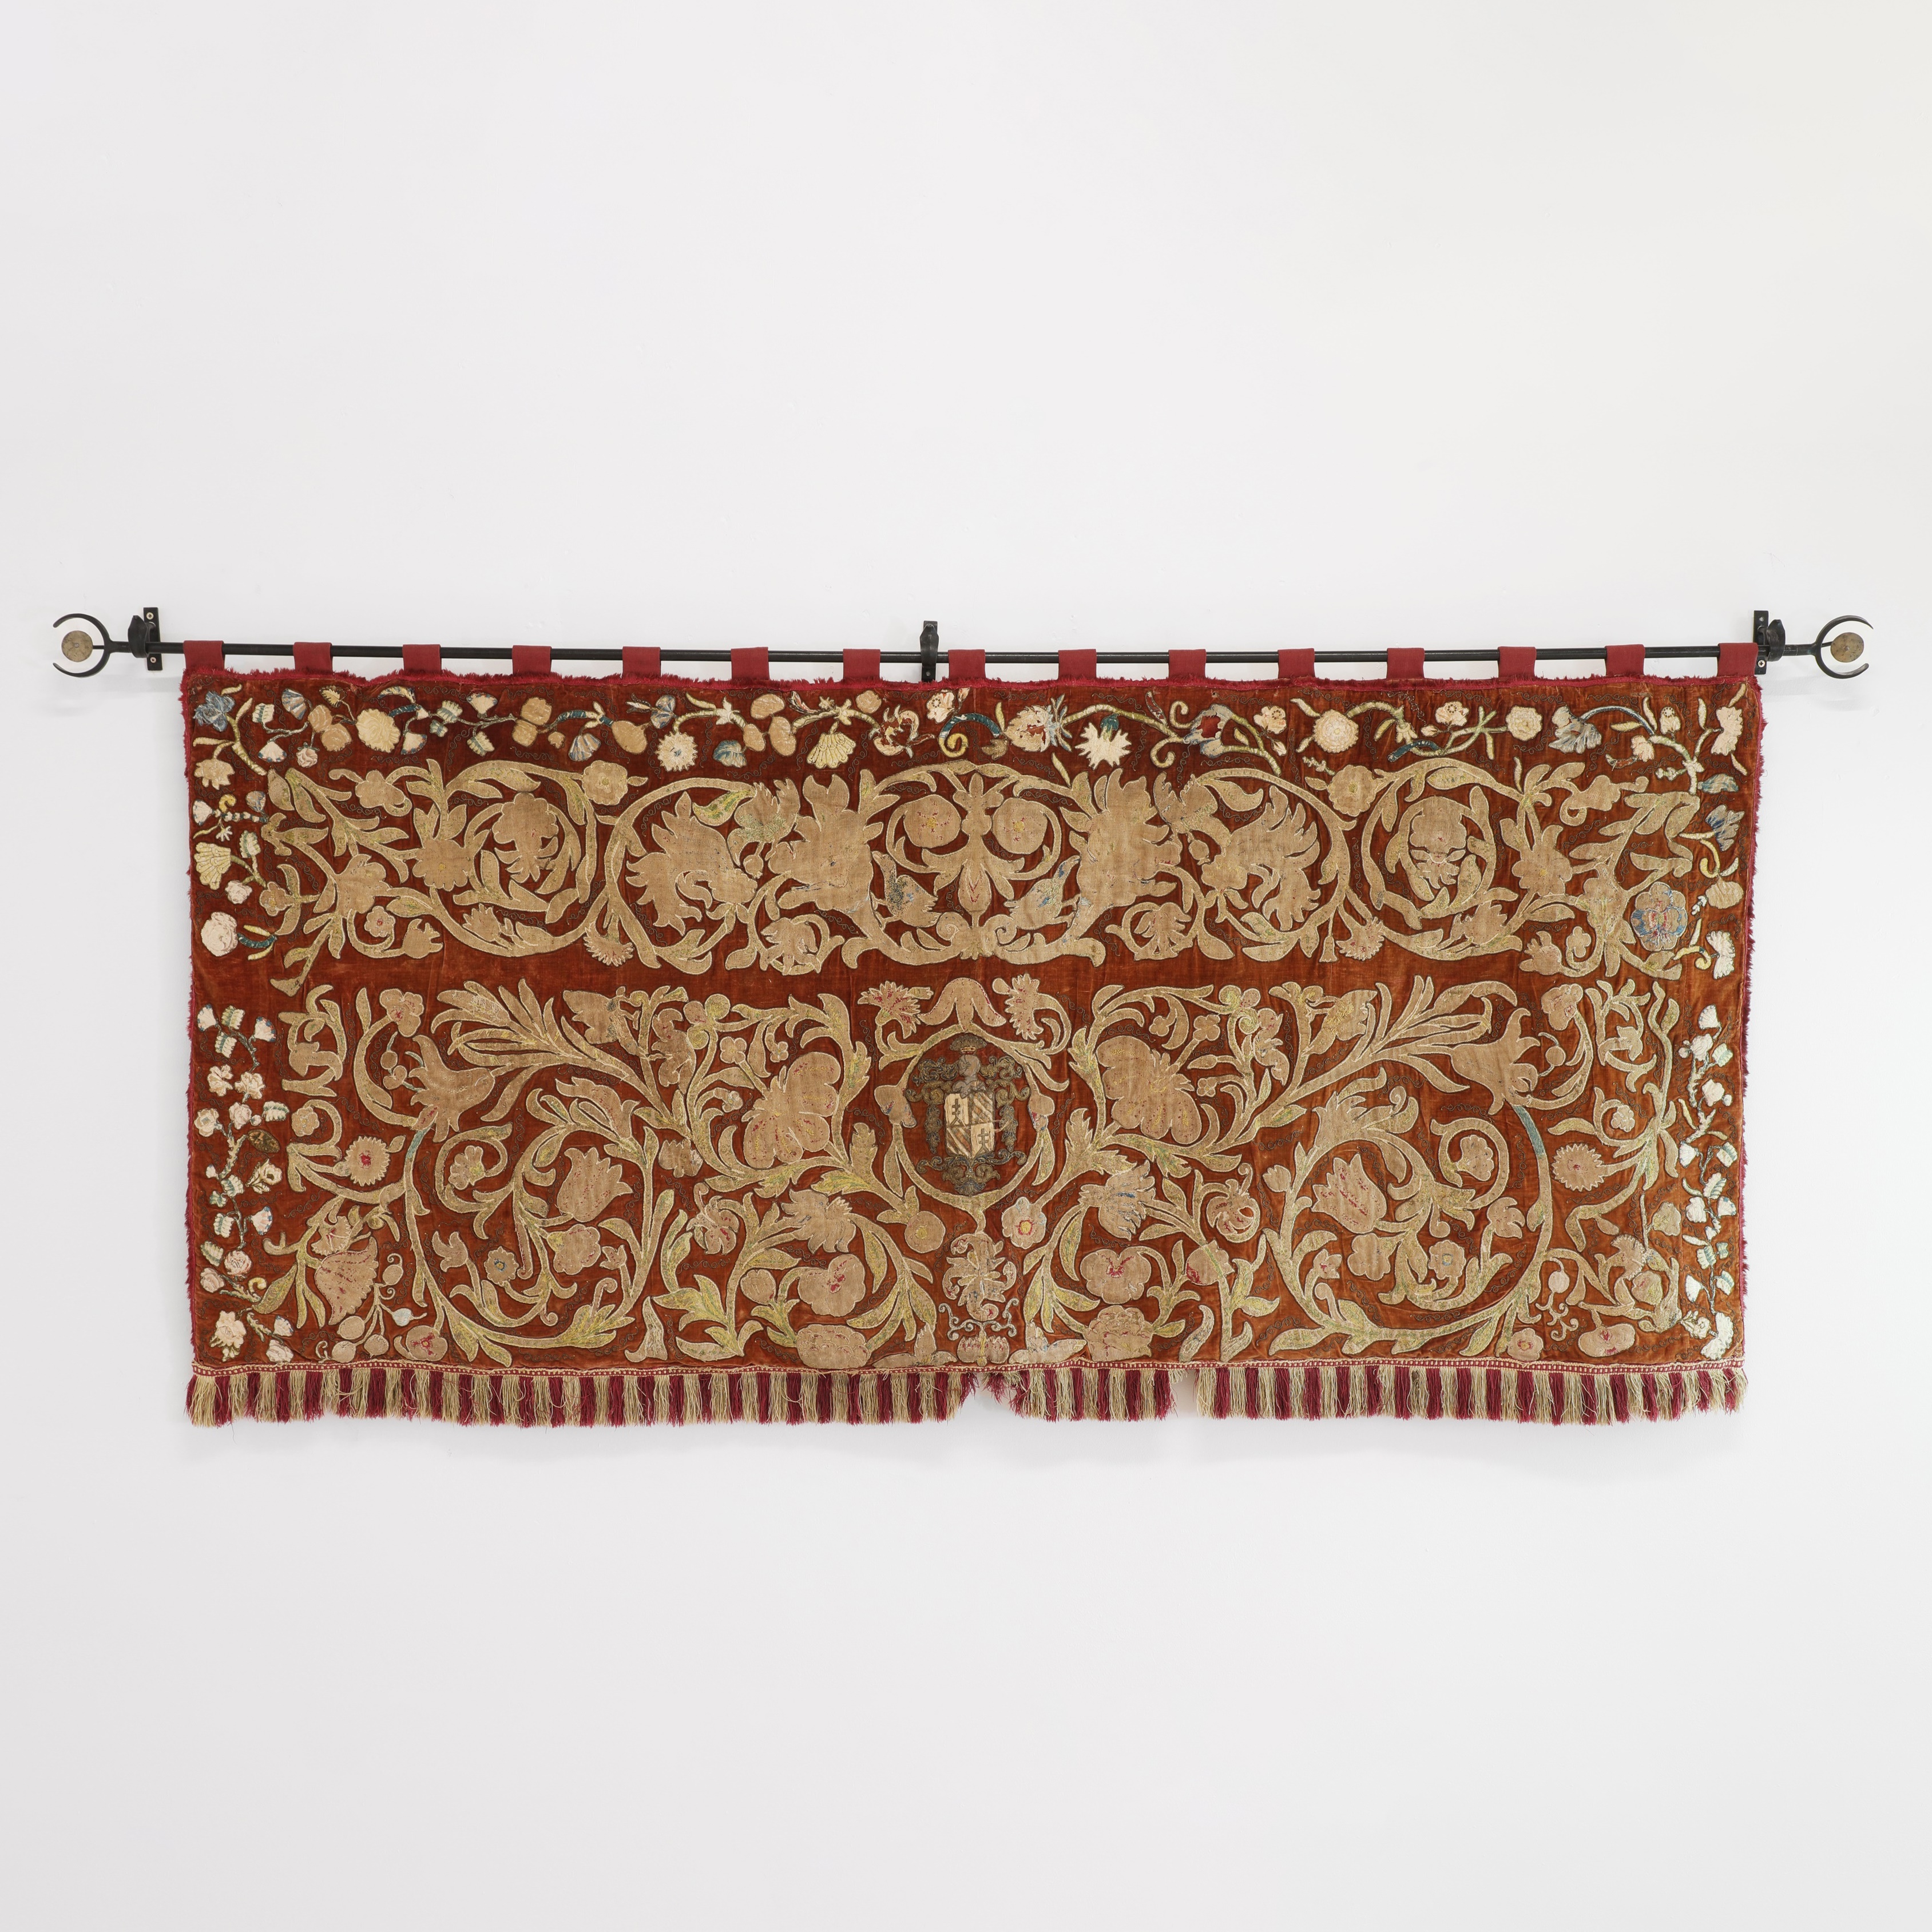 A velvet, silk and metal thread appliqué and embroidered hanging, 19th century